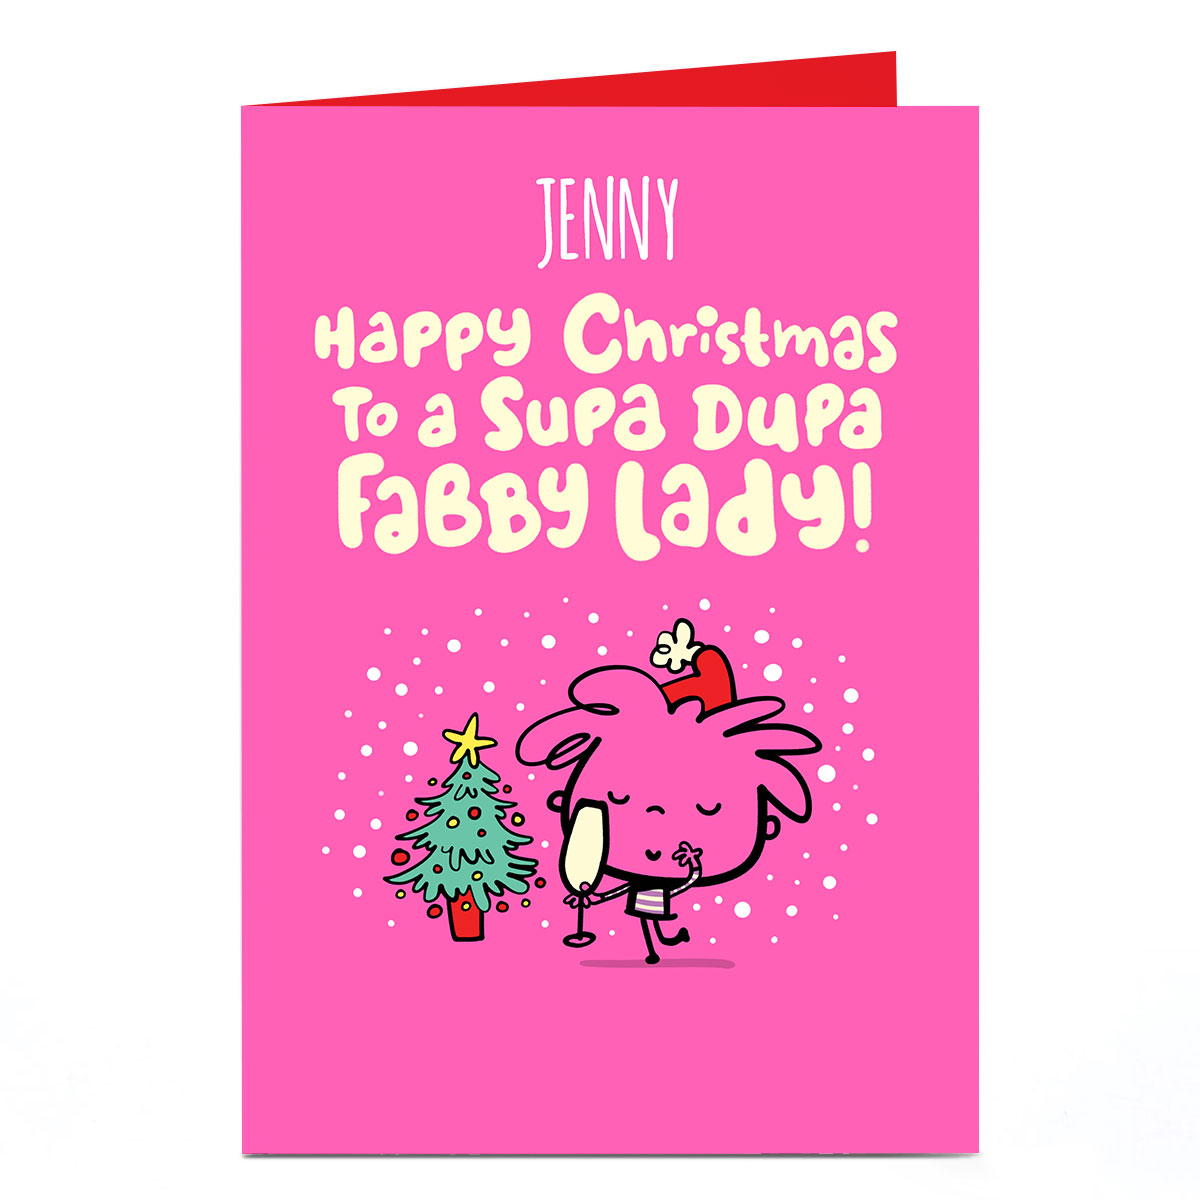 Personalised Fruitloops Christmas Card - Fabby Lady